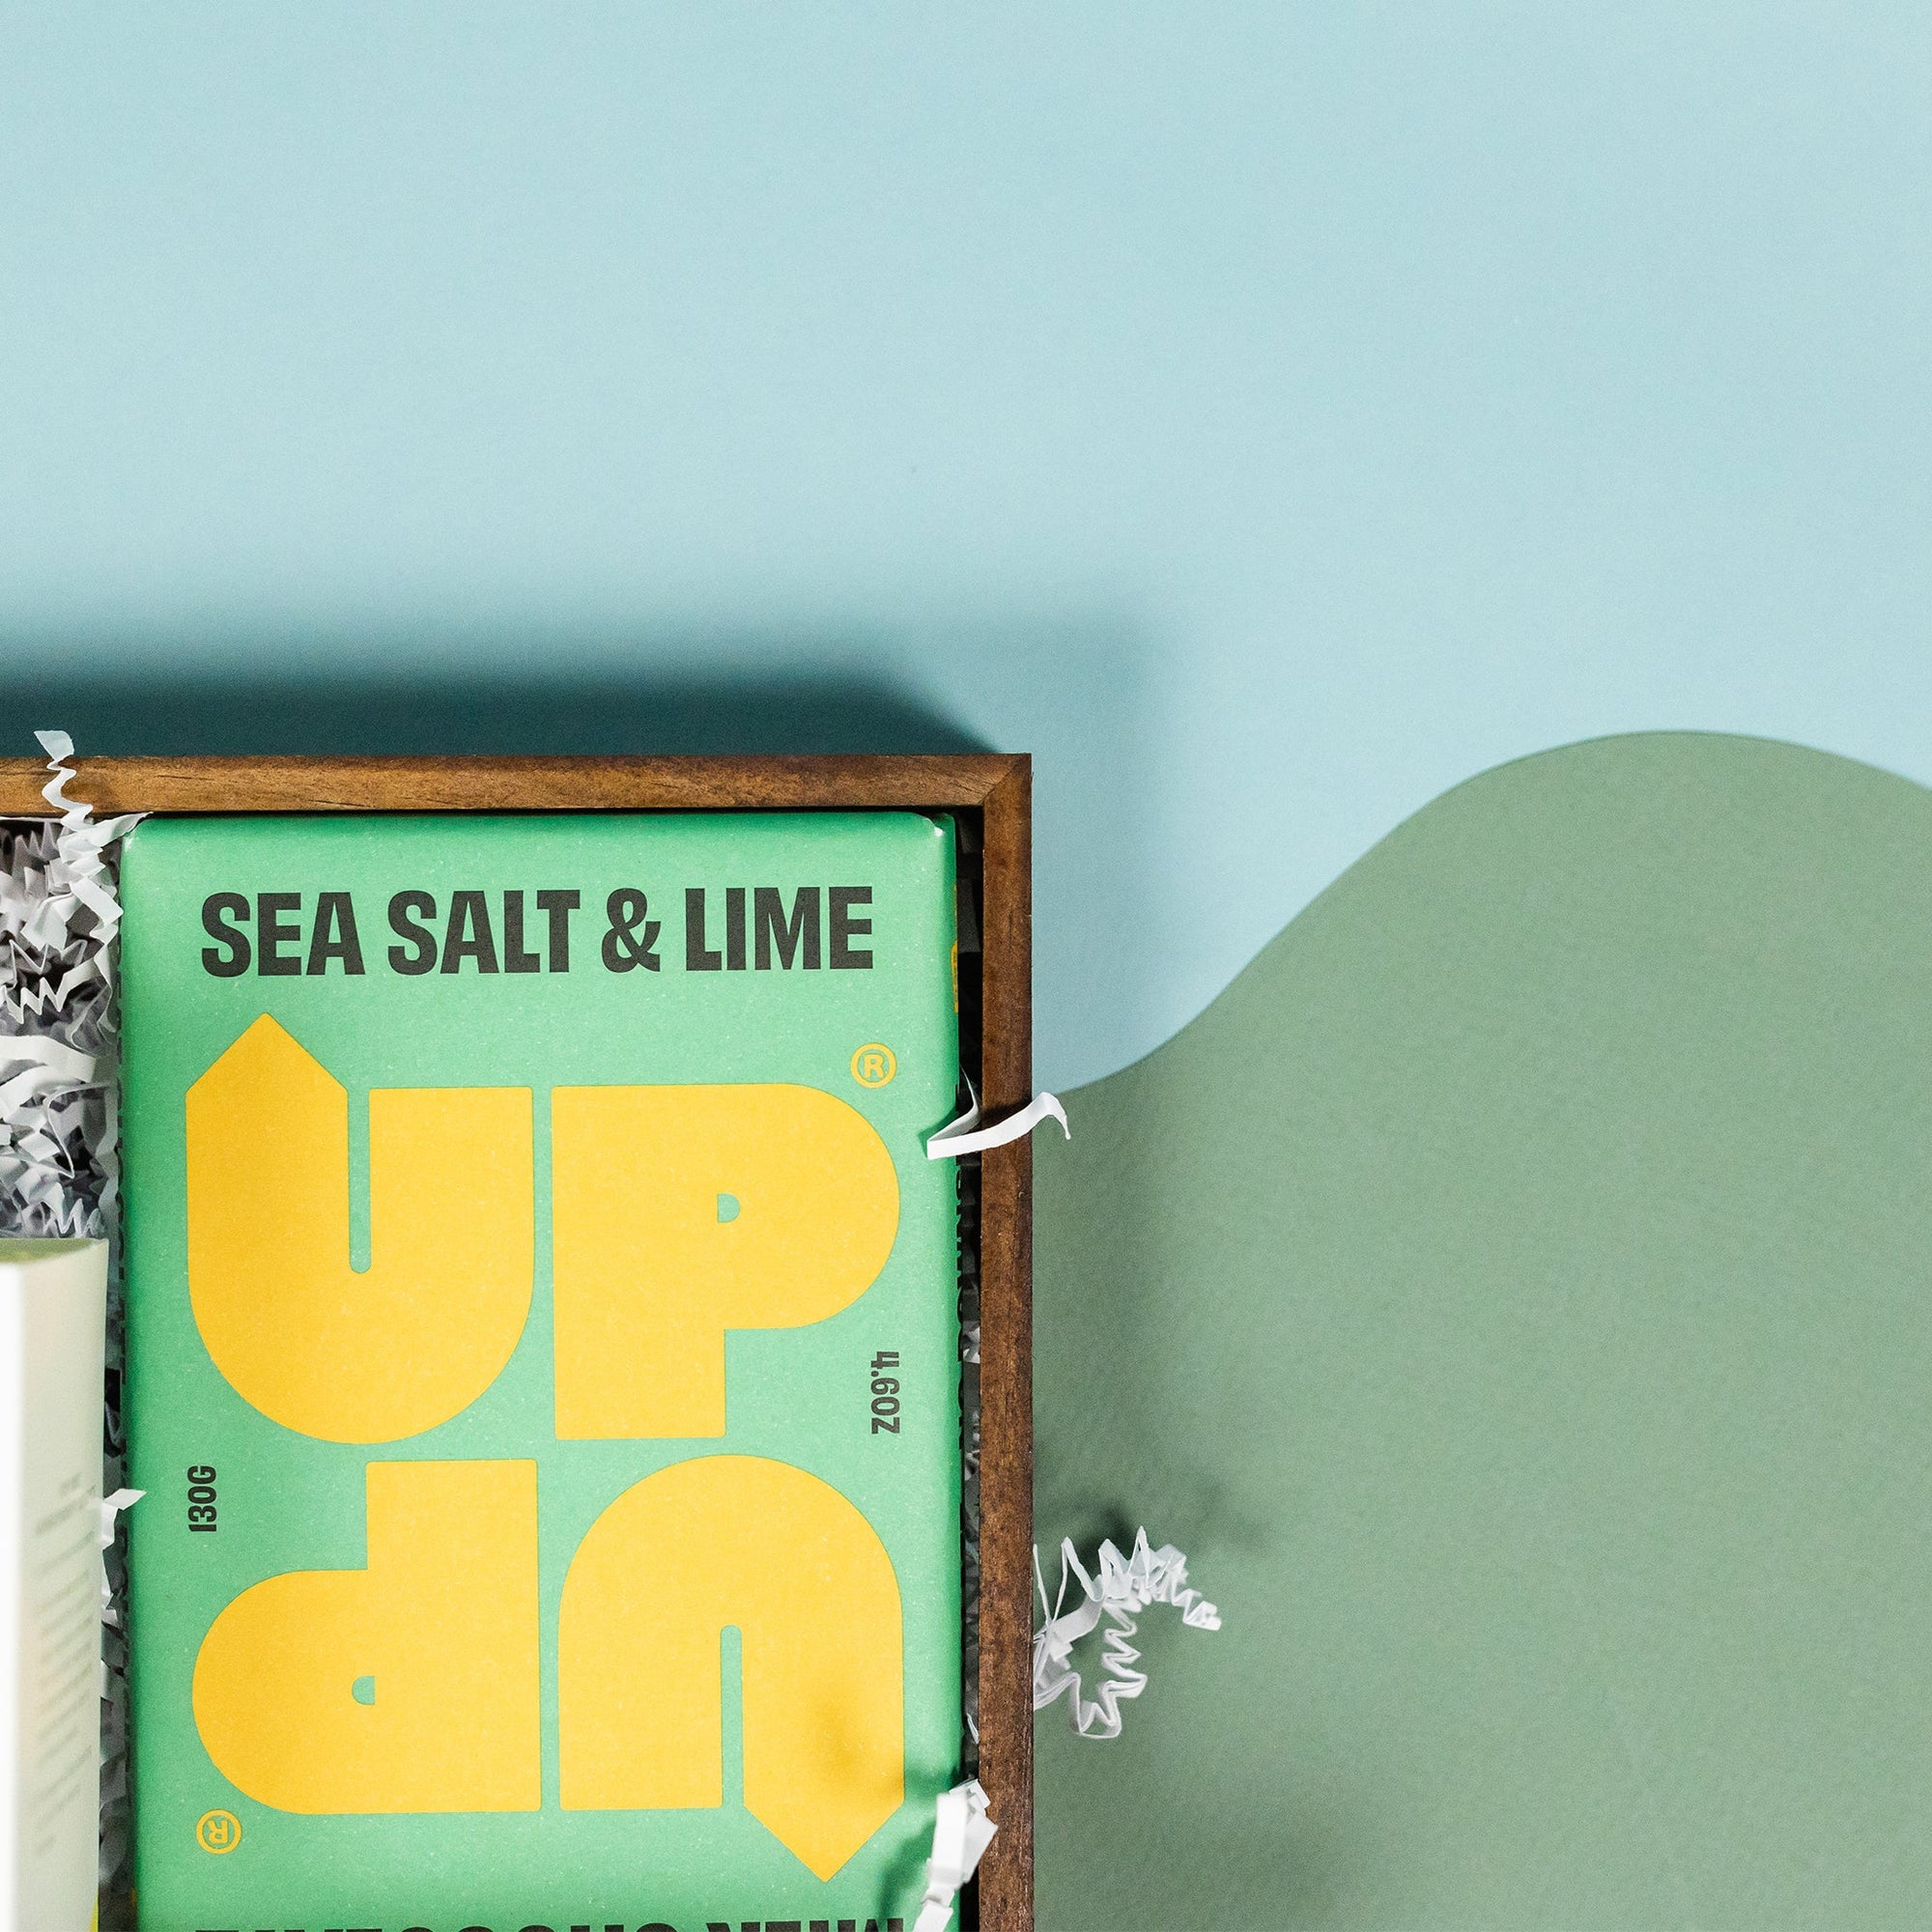 On a calming blue and green background with sunny yellow cutout sits a wooden tray of four products and white paper krinkle. This photo is a close-up on the UP UP sea salt and lime milk chocolate bar. It has a bright grass green label with UP UP in prominent yellow letters.